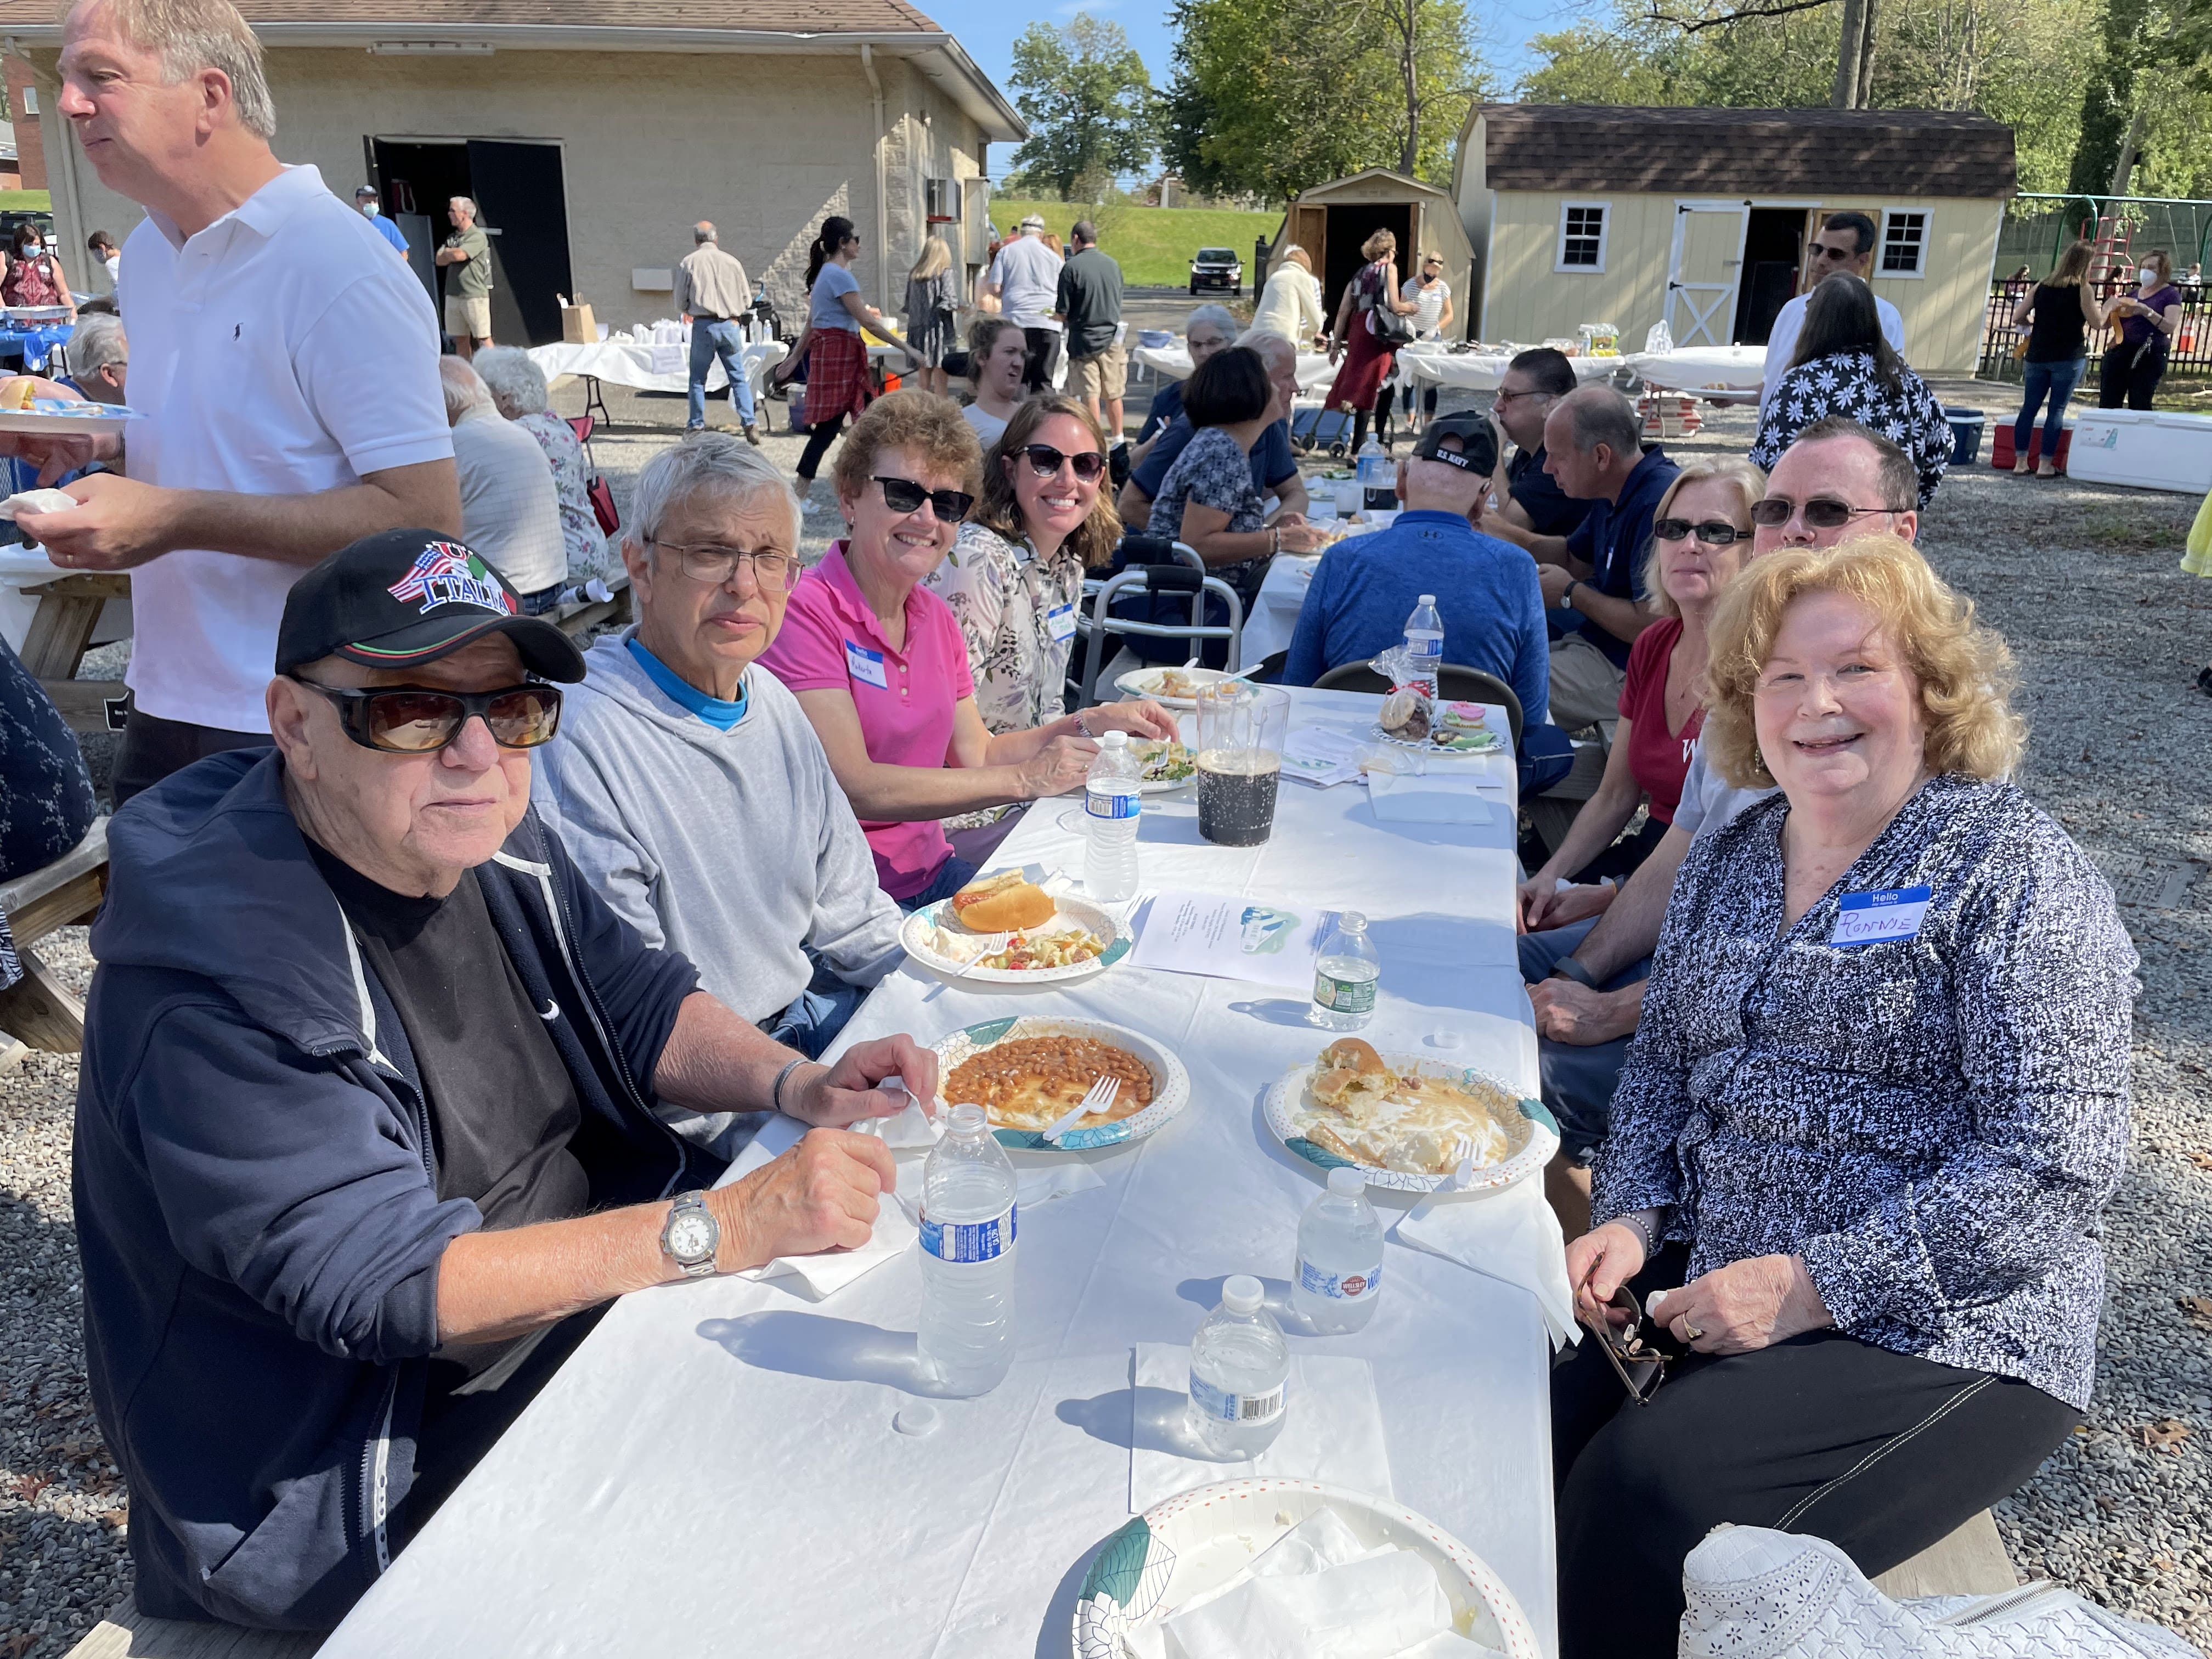 Church of the Little Flower in Berkeley Heights held a Feast Day Mass and Picnic in a local park as part of the "welcome-back" phase of a new initiative launched by the Archdiocese of Newark called Vine and Branches. (Photo courtesy of Church of the Little Flower)